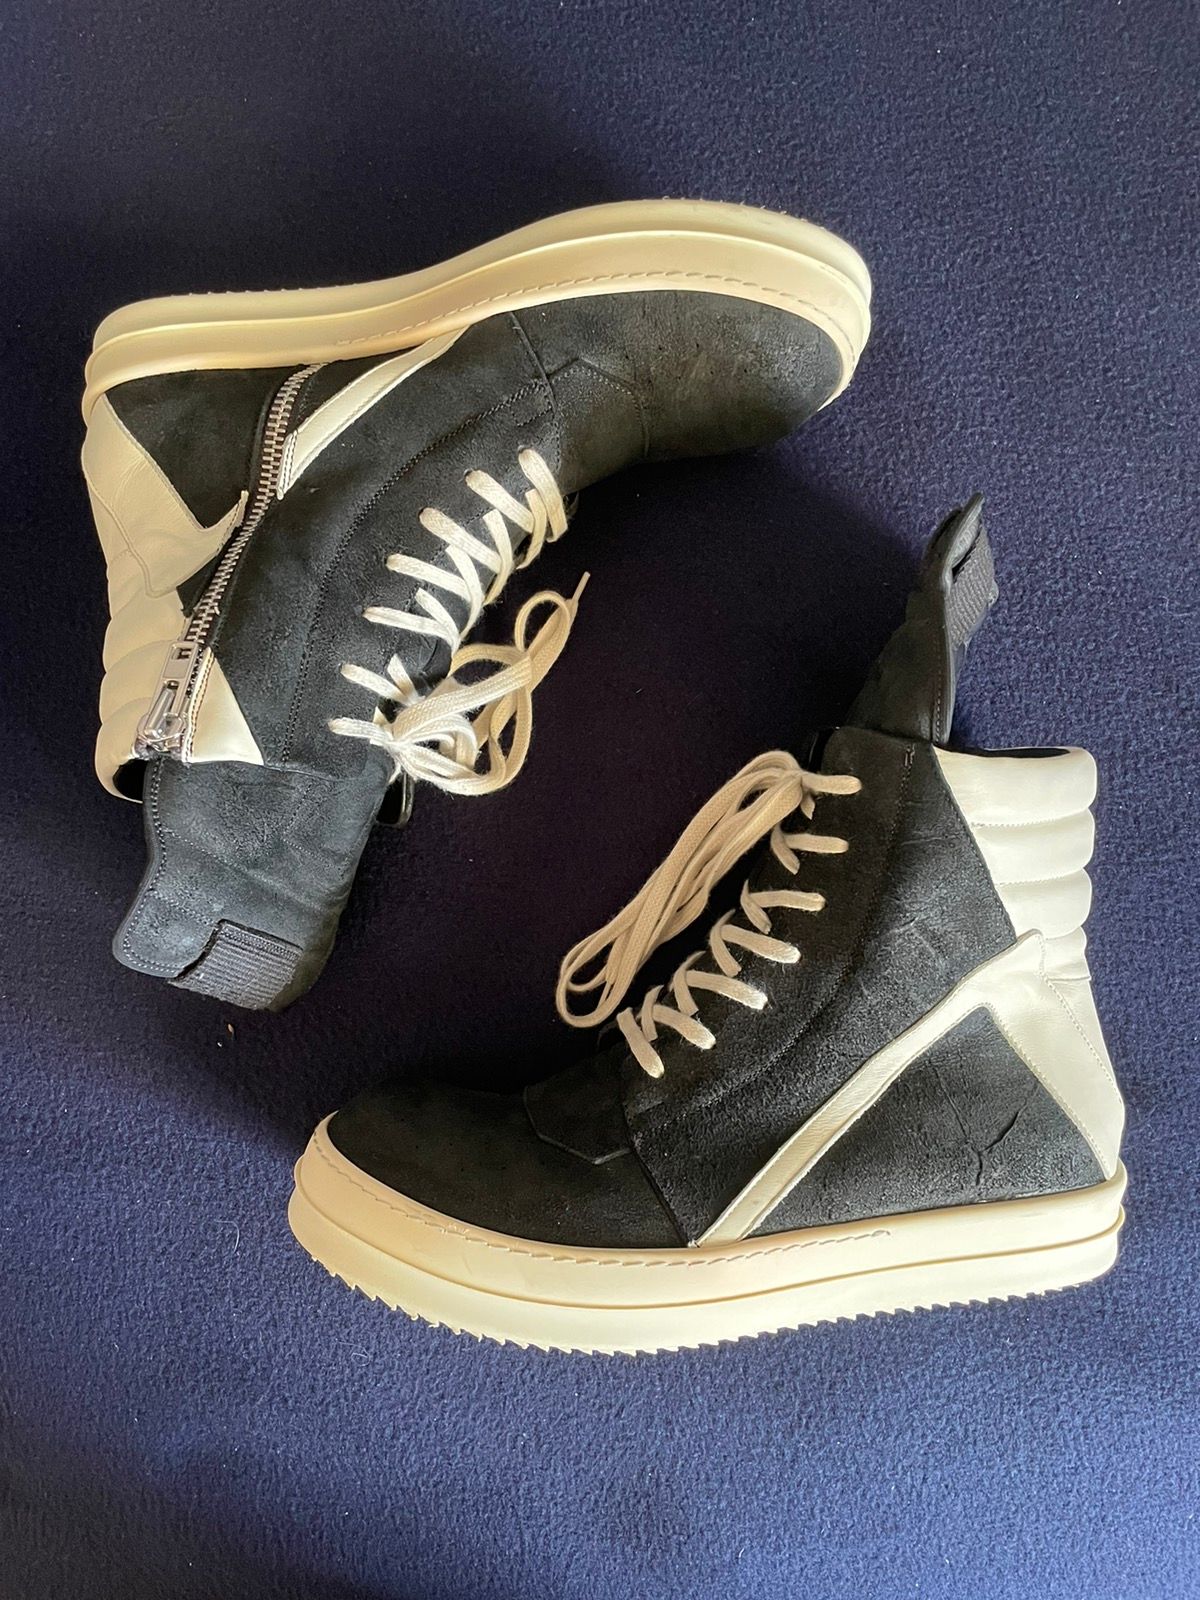 Pre-owned Rick Owens Geobaskets Blistered Suede Leather Black White Shoes